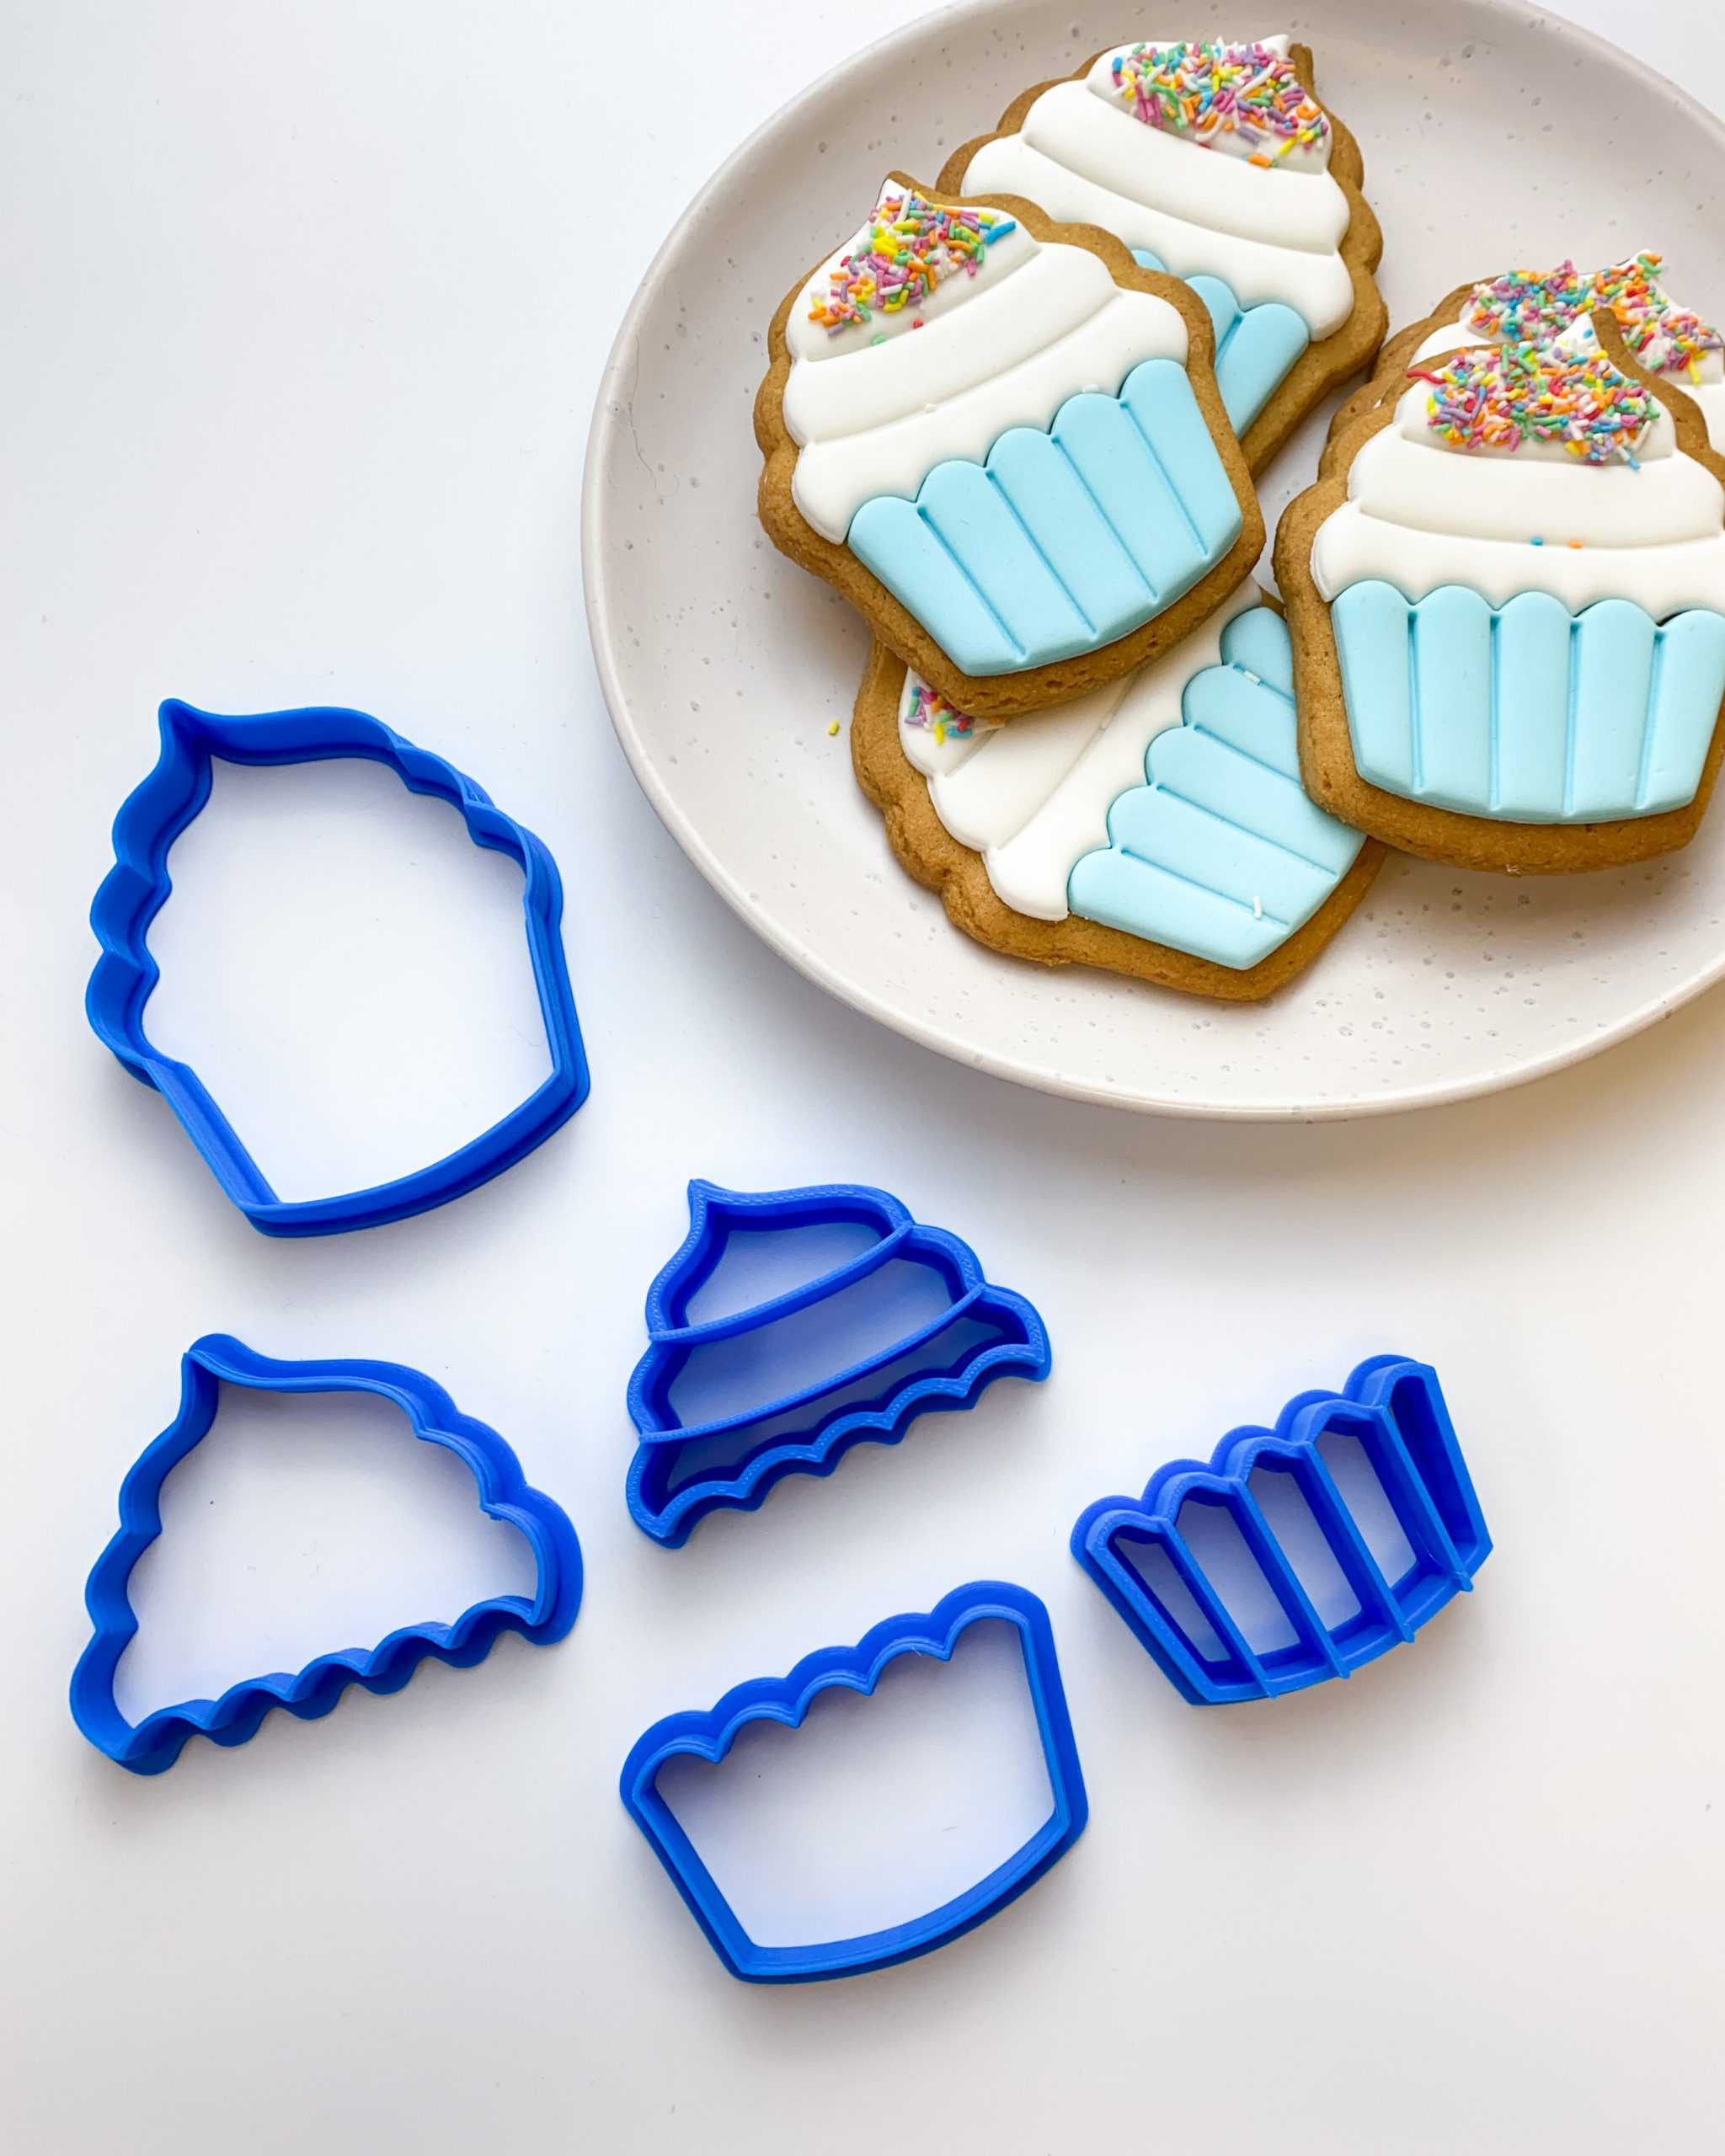 Party Cupcake DIY Bluestar Cookie cutter Mold Cutter Kit Miniatures Rulers Fondant Pastry Set of 3 items Baking